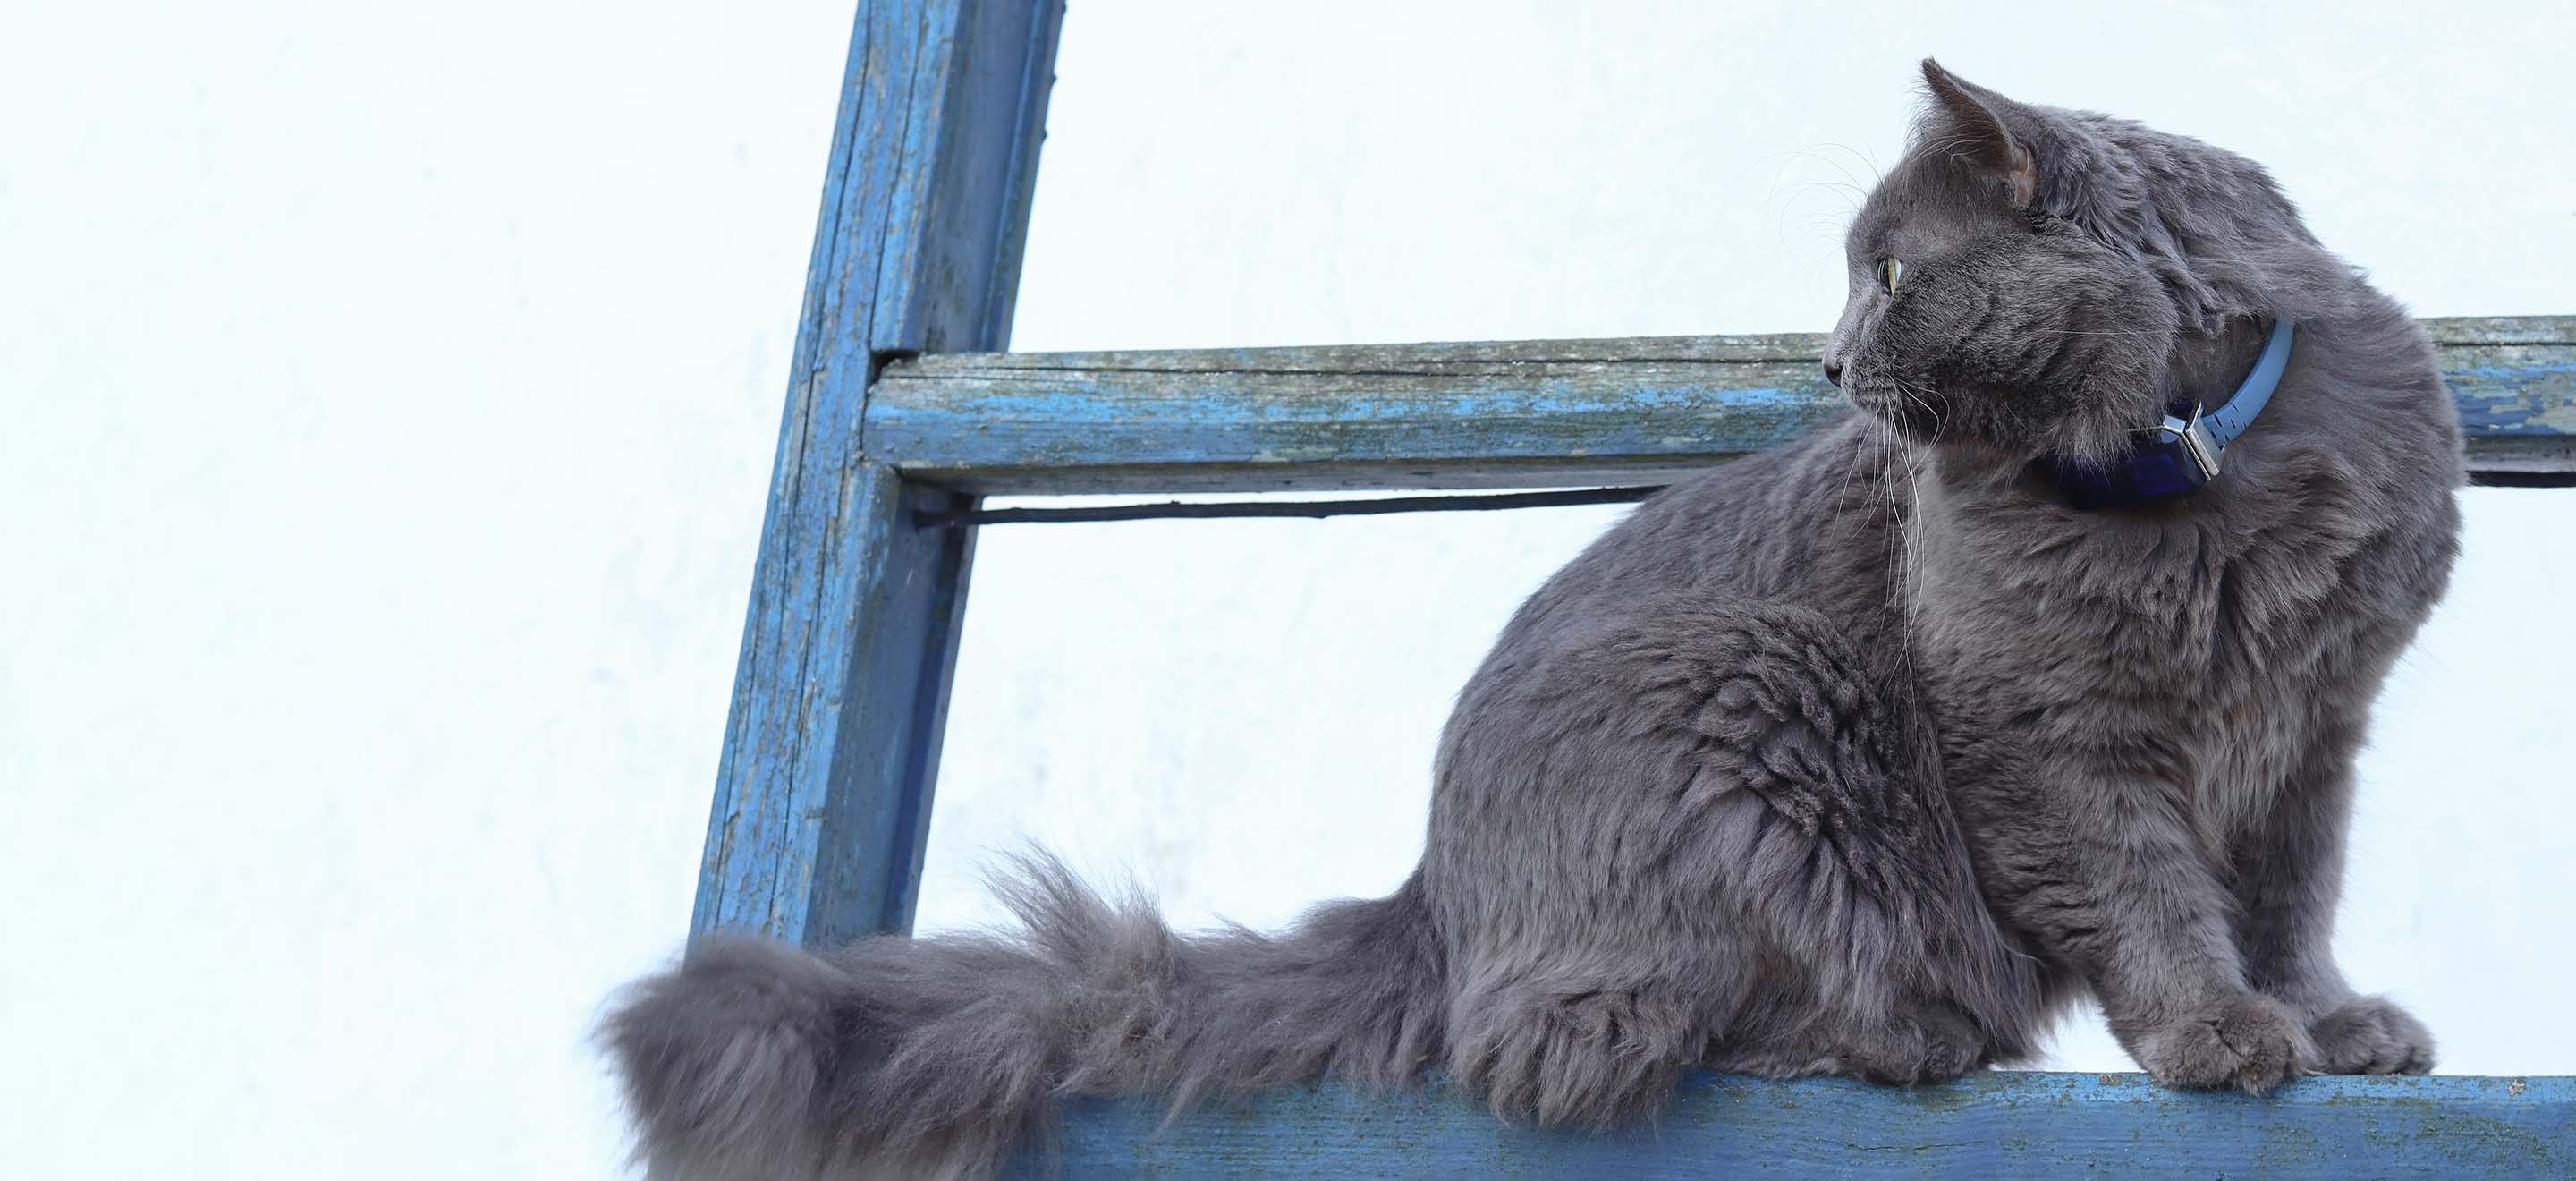 Gray Nebelung cat sitting on the rung of a blue wooden ladder image